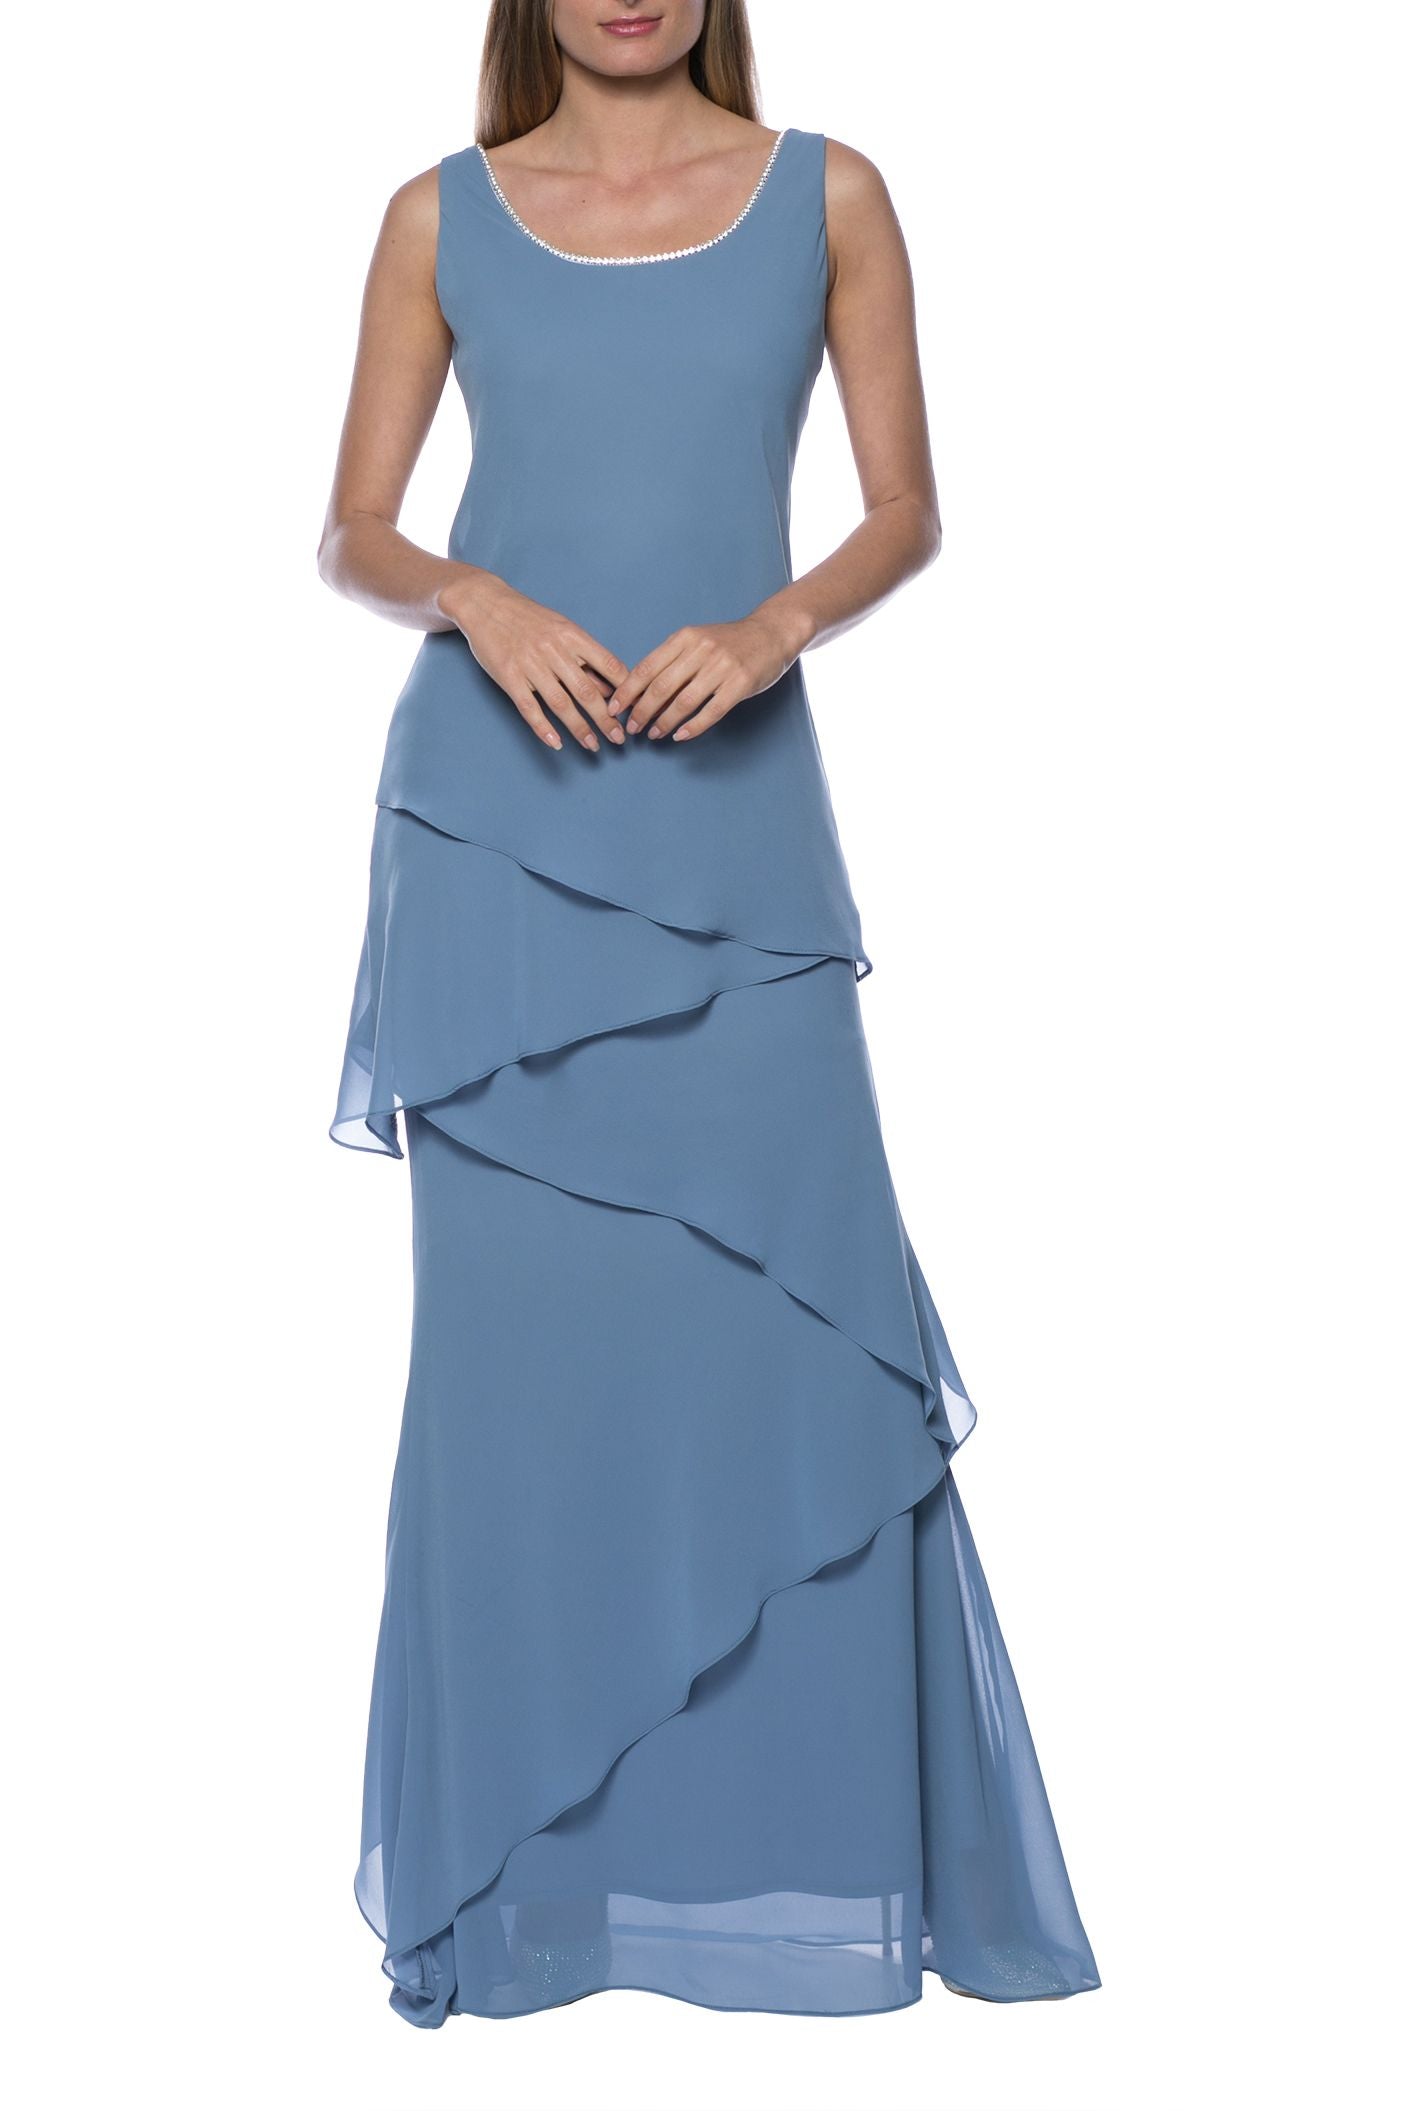 Mother of the Bride Dresses Tiered Solid Chiffon Dress with Matching Jacket Set Dior Blue